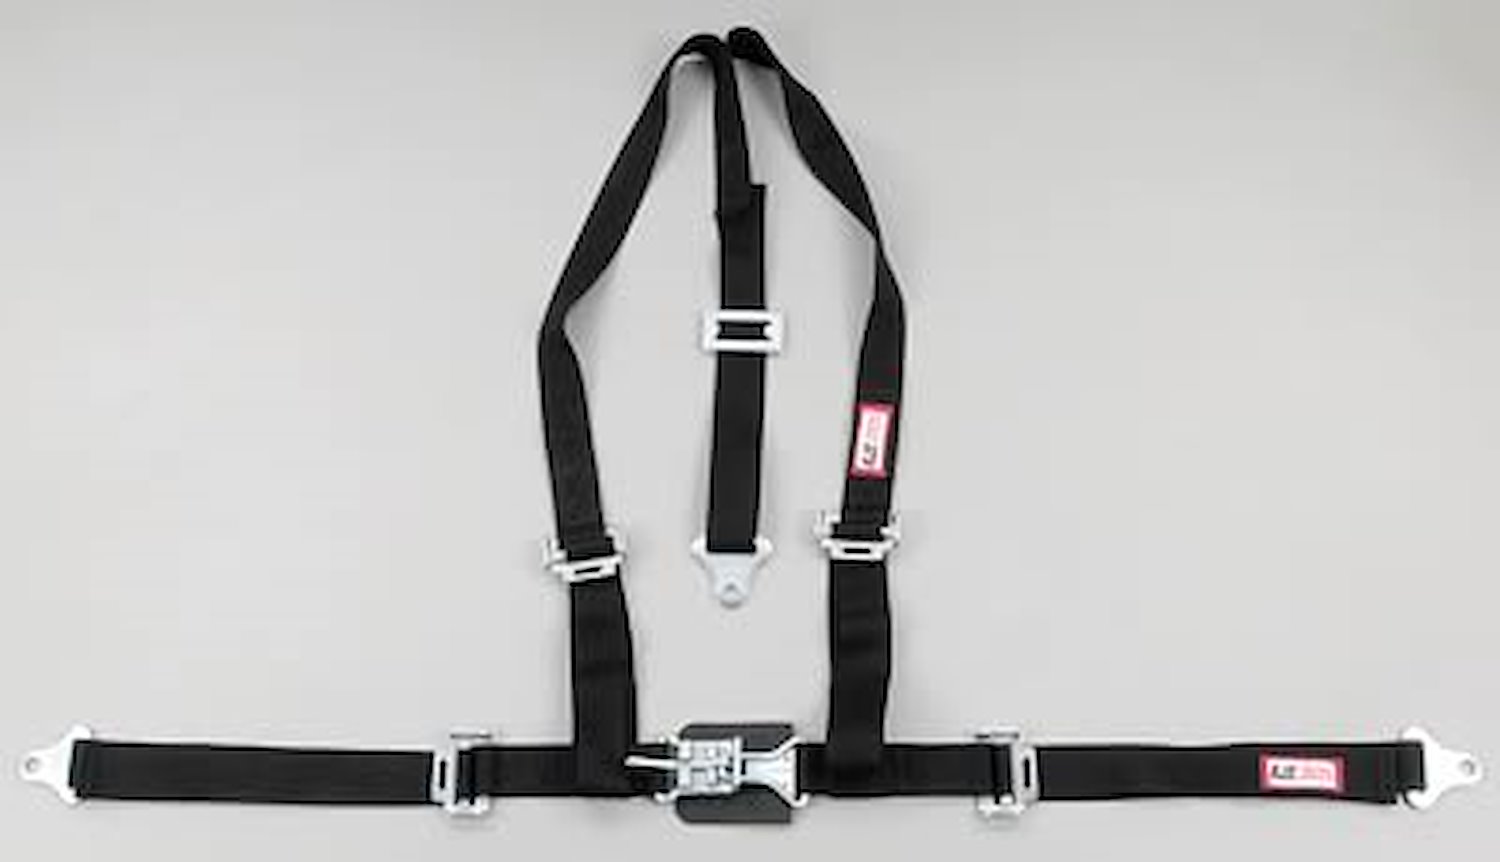 NON-SFI L&L HARNESS 3 PULL DOWN Lap BELT SNAP SEWN IN 2 S.H. Y FLOOR Mount WRAP/SNAP RED